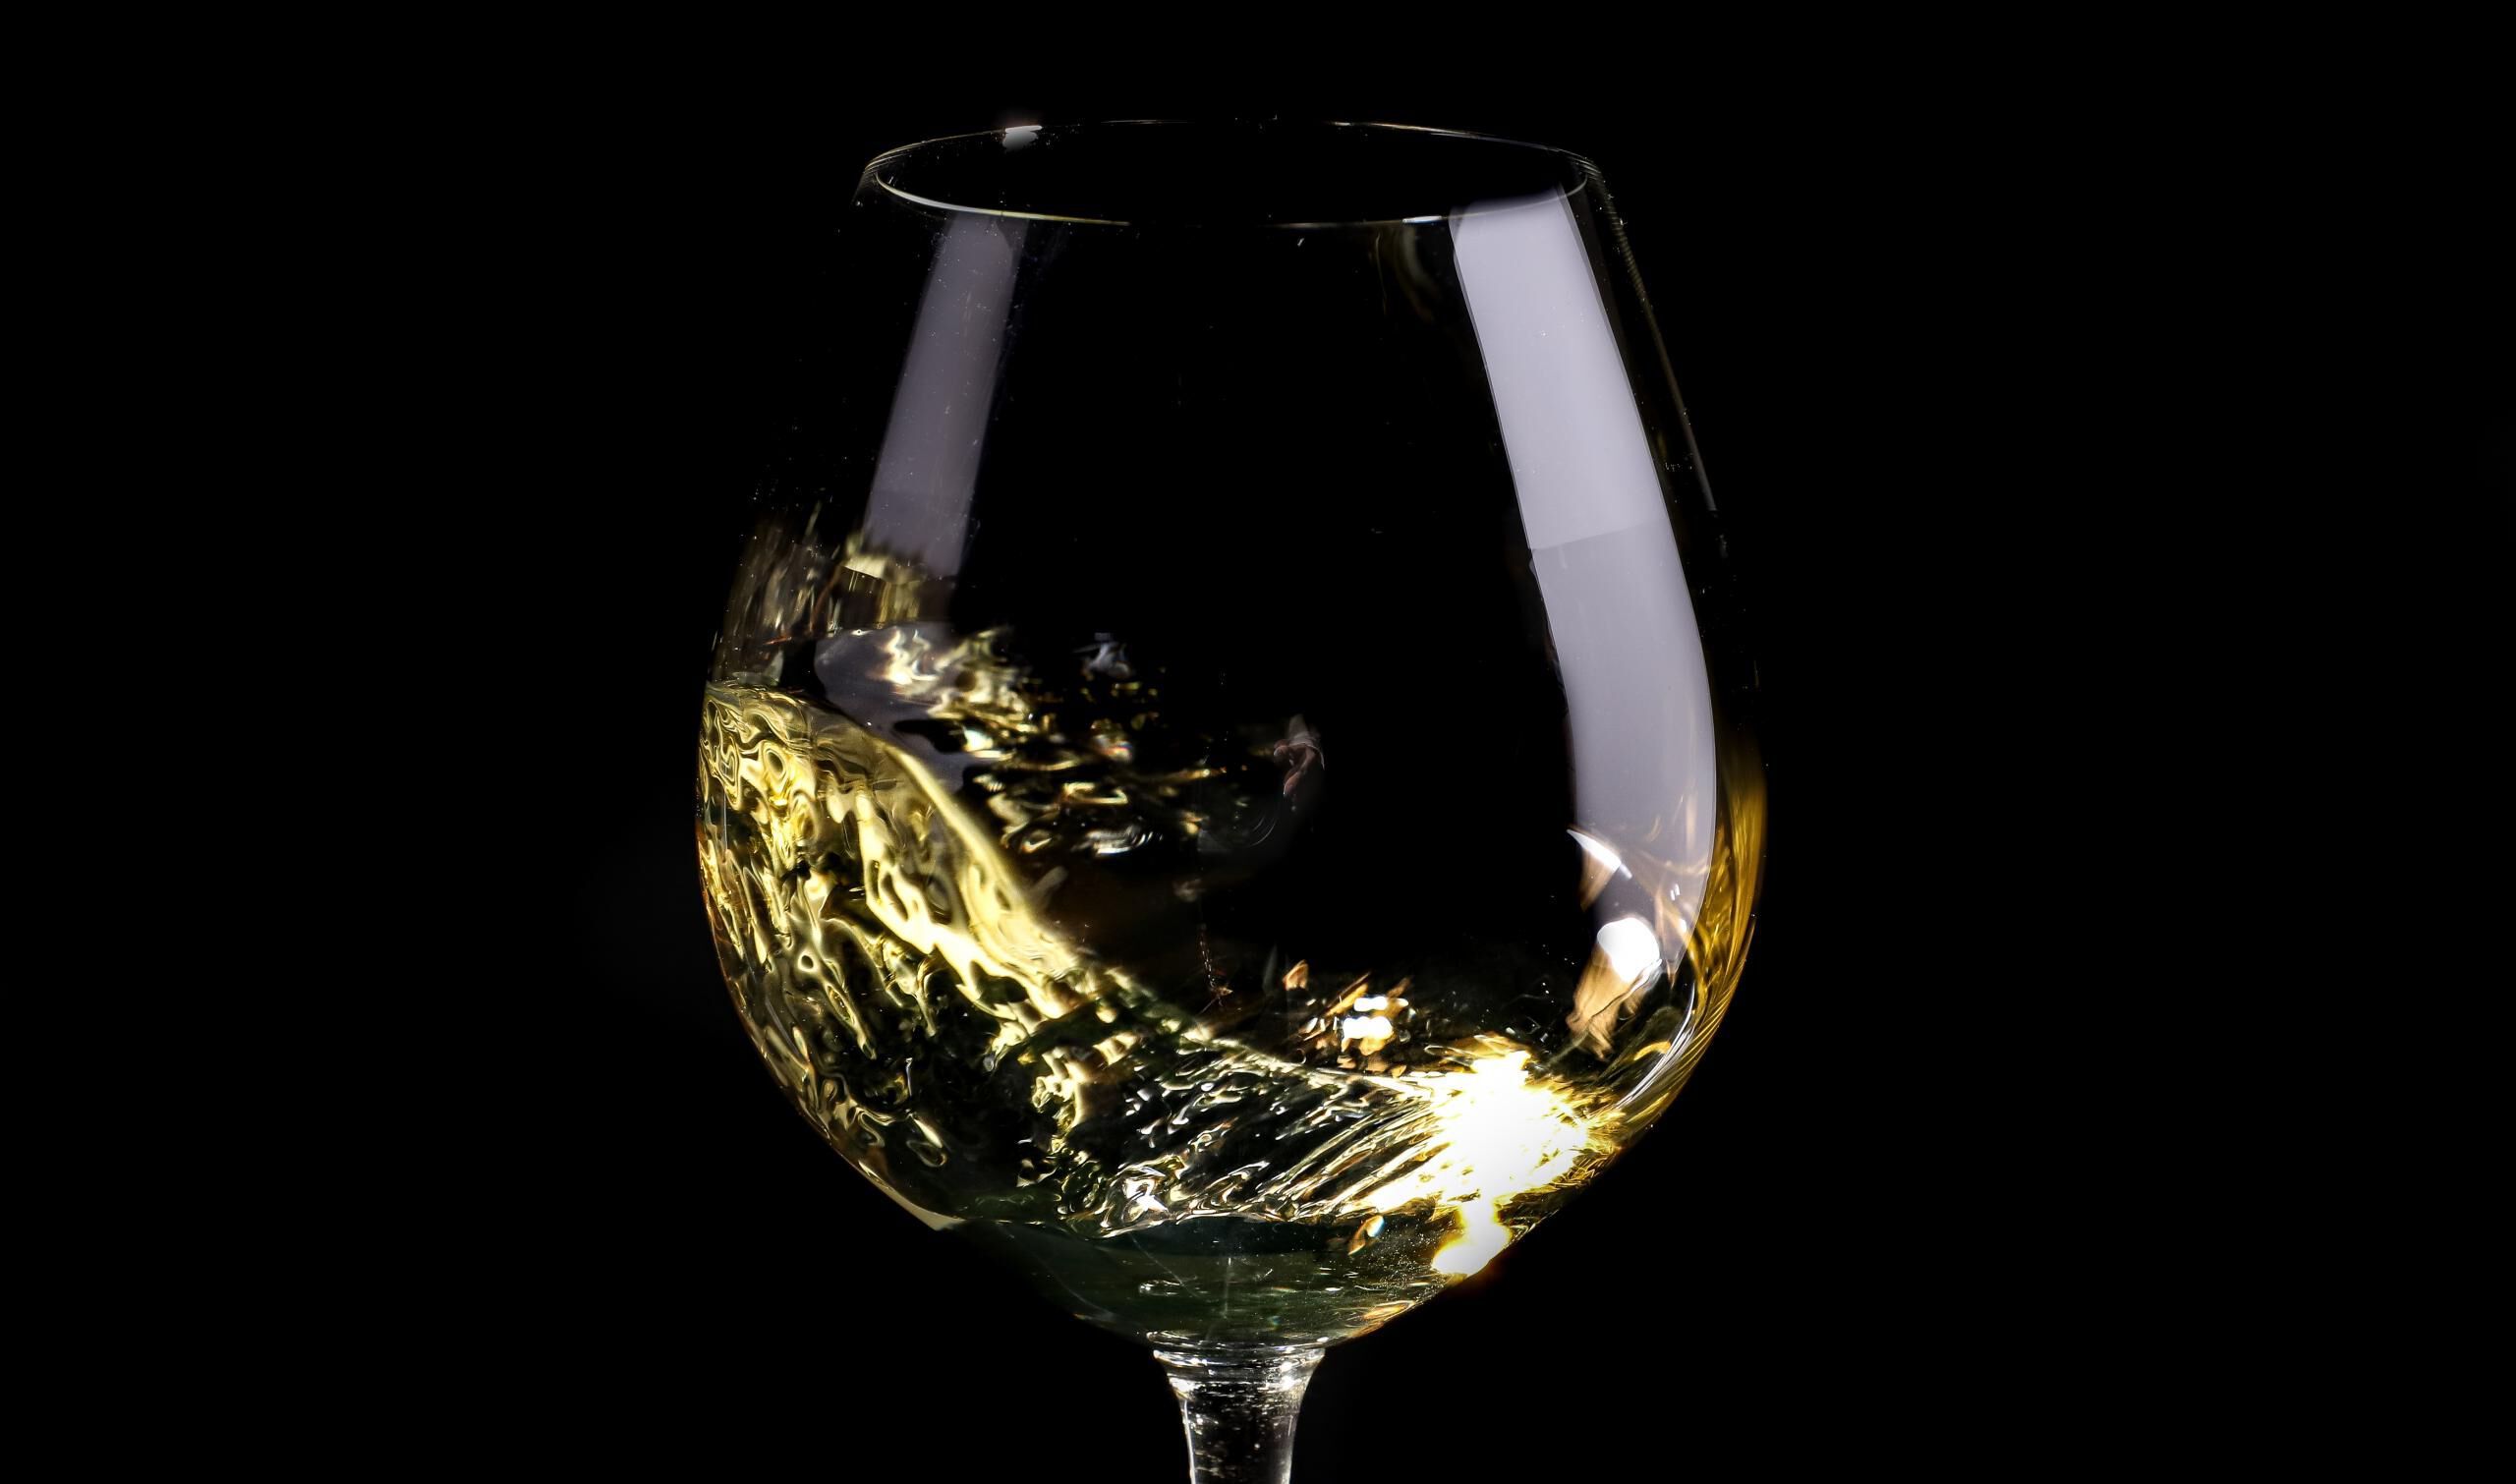 Chardonnay swirling in a glass against a black background